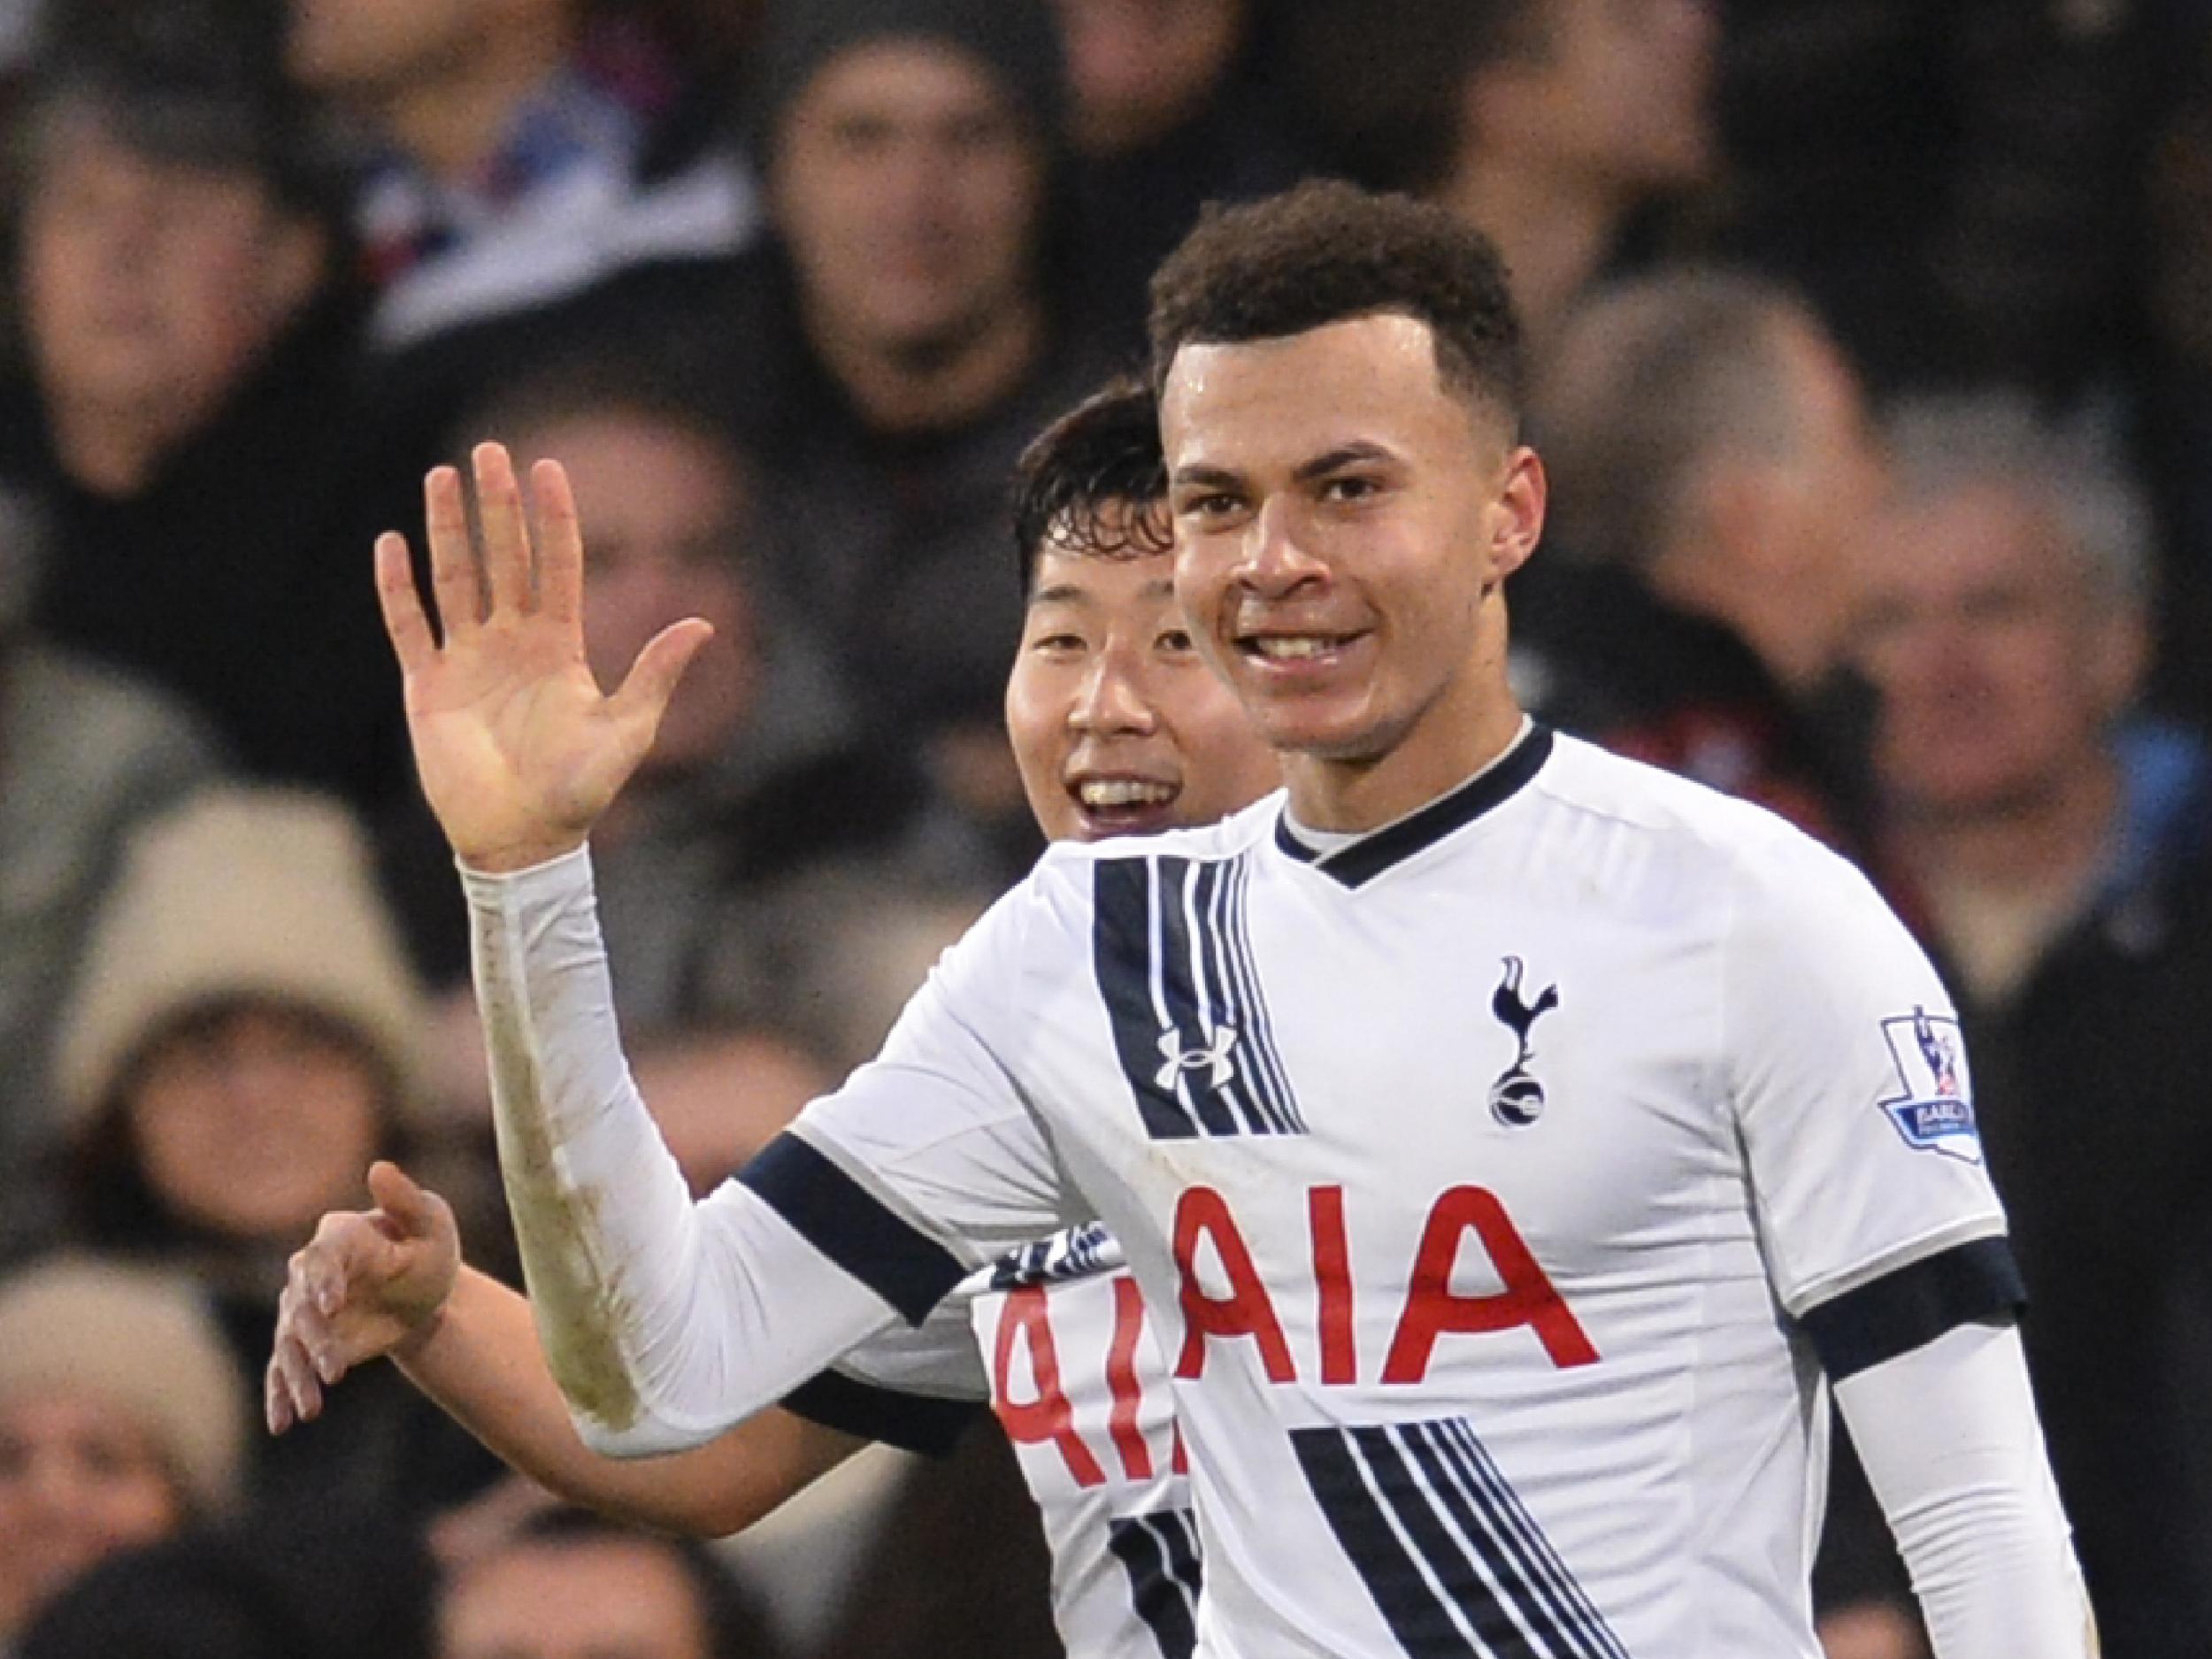 Dele Alli has looked impressive for Spurs this season